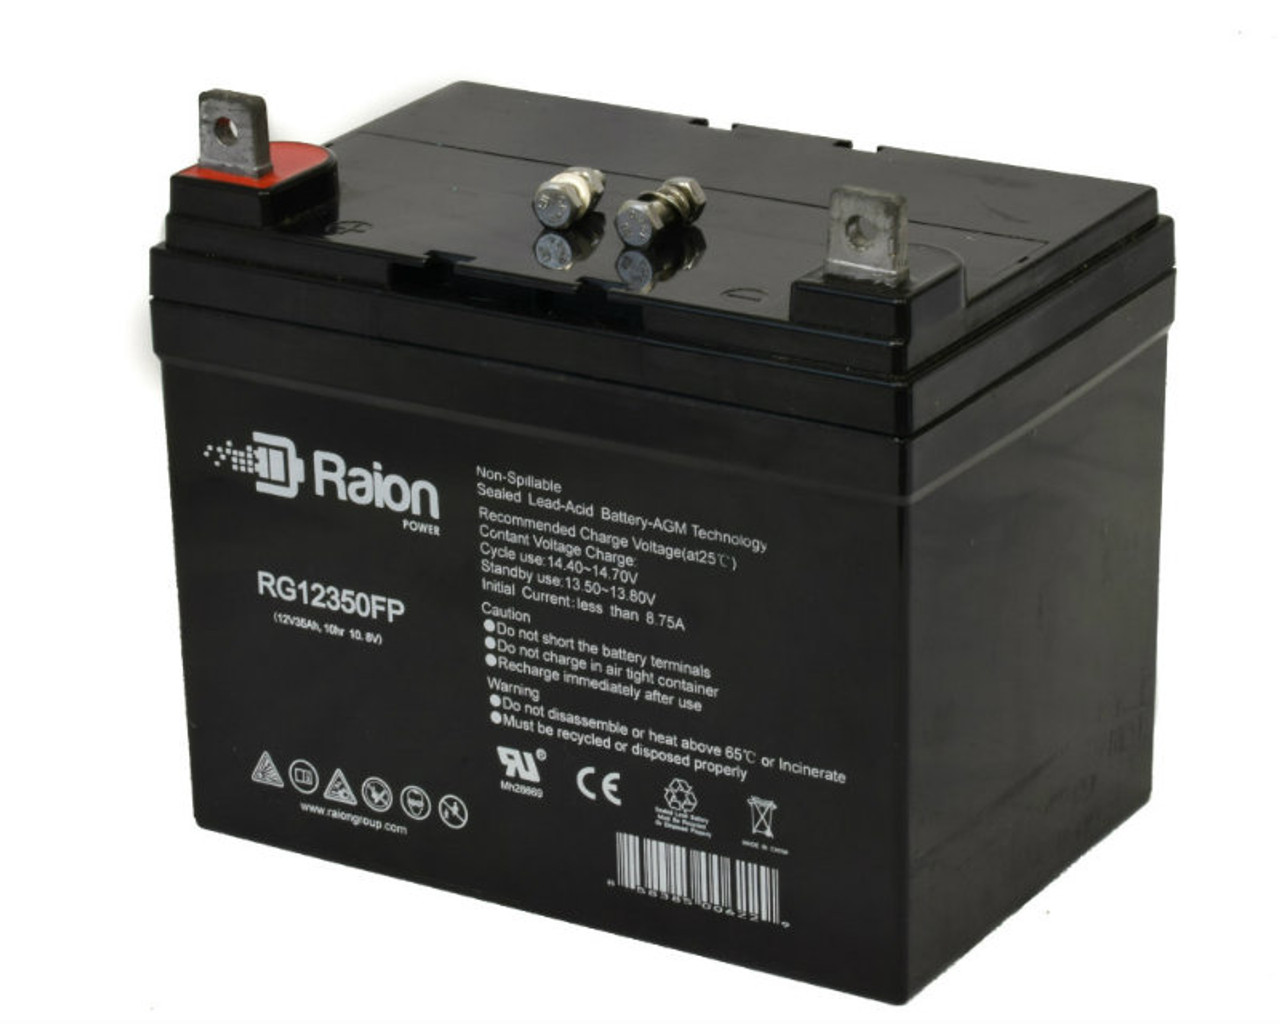 Raion Power Replacement 12V 35Ah Emergency Light Battery for Exit Light Company EL-DB - 1 Pack